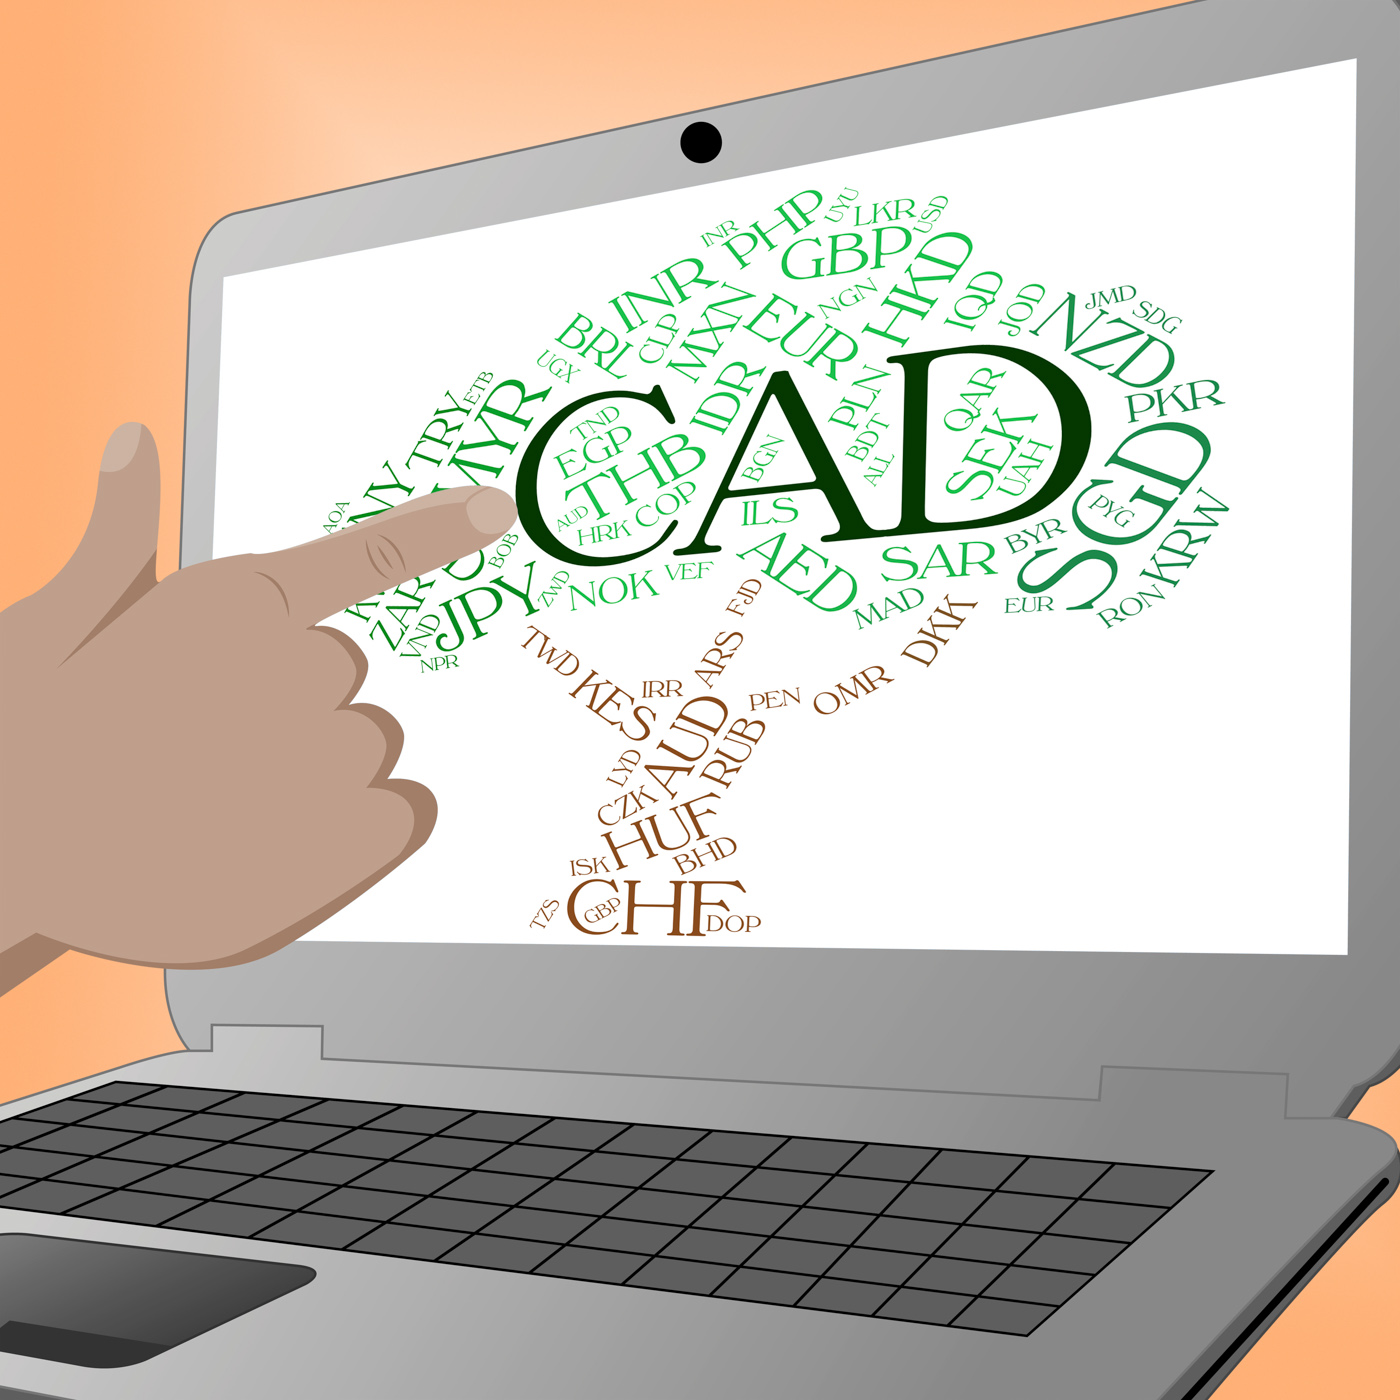 Cad currency indicates forex trading and currencies photo